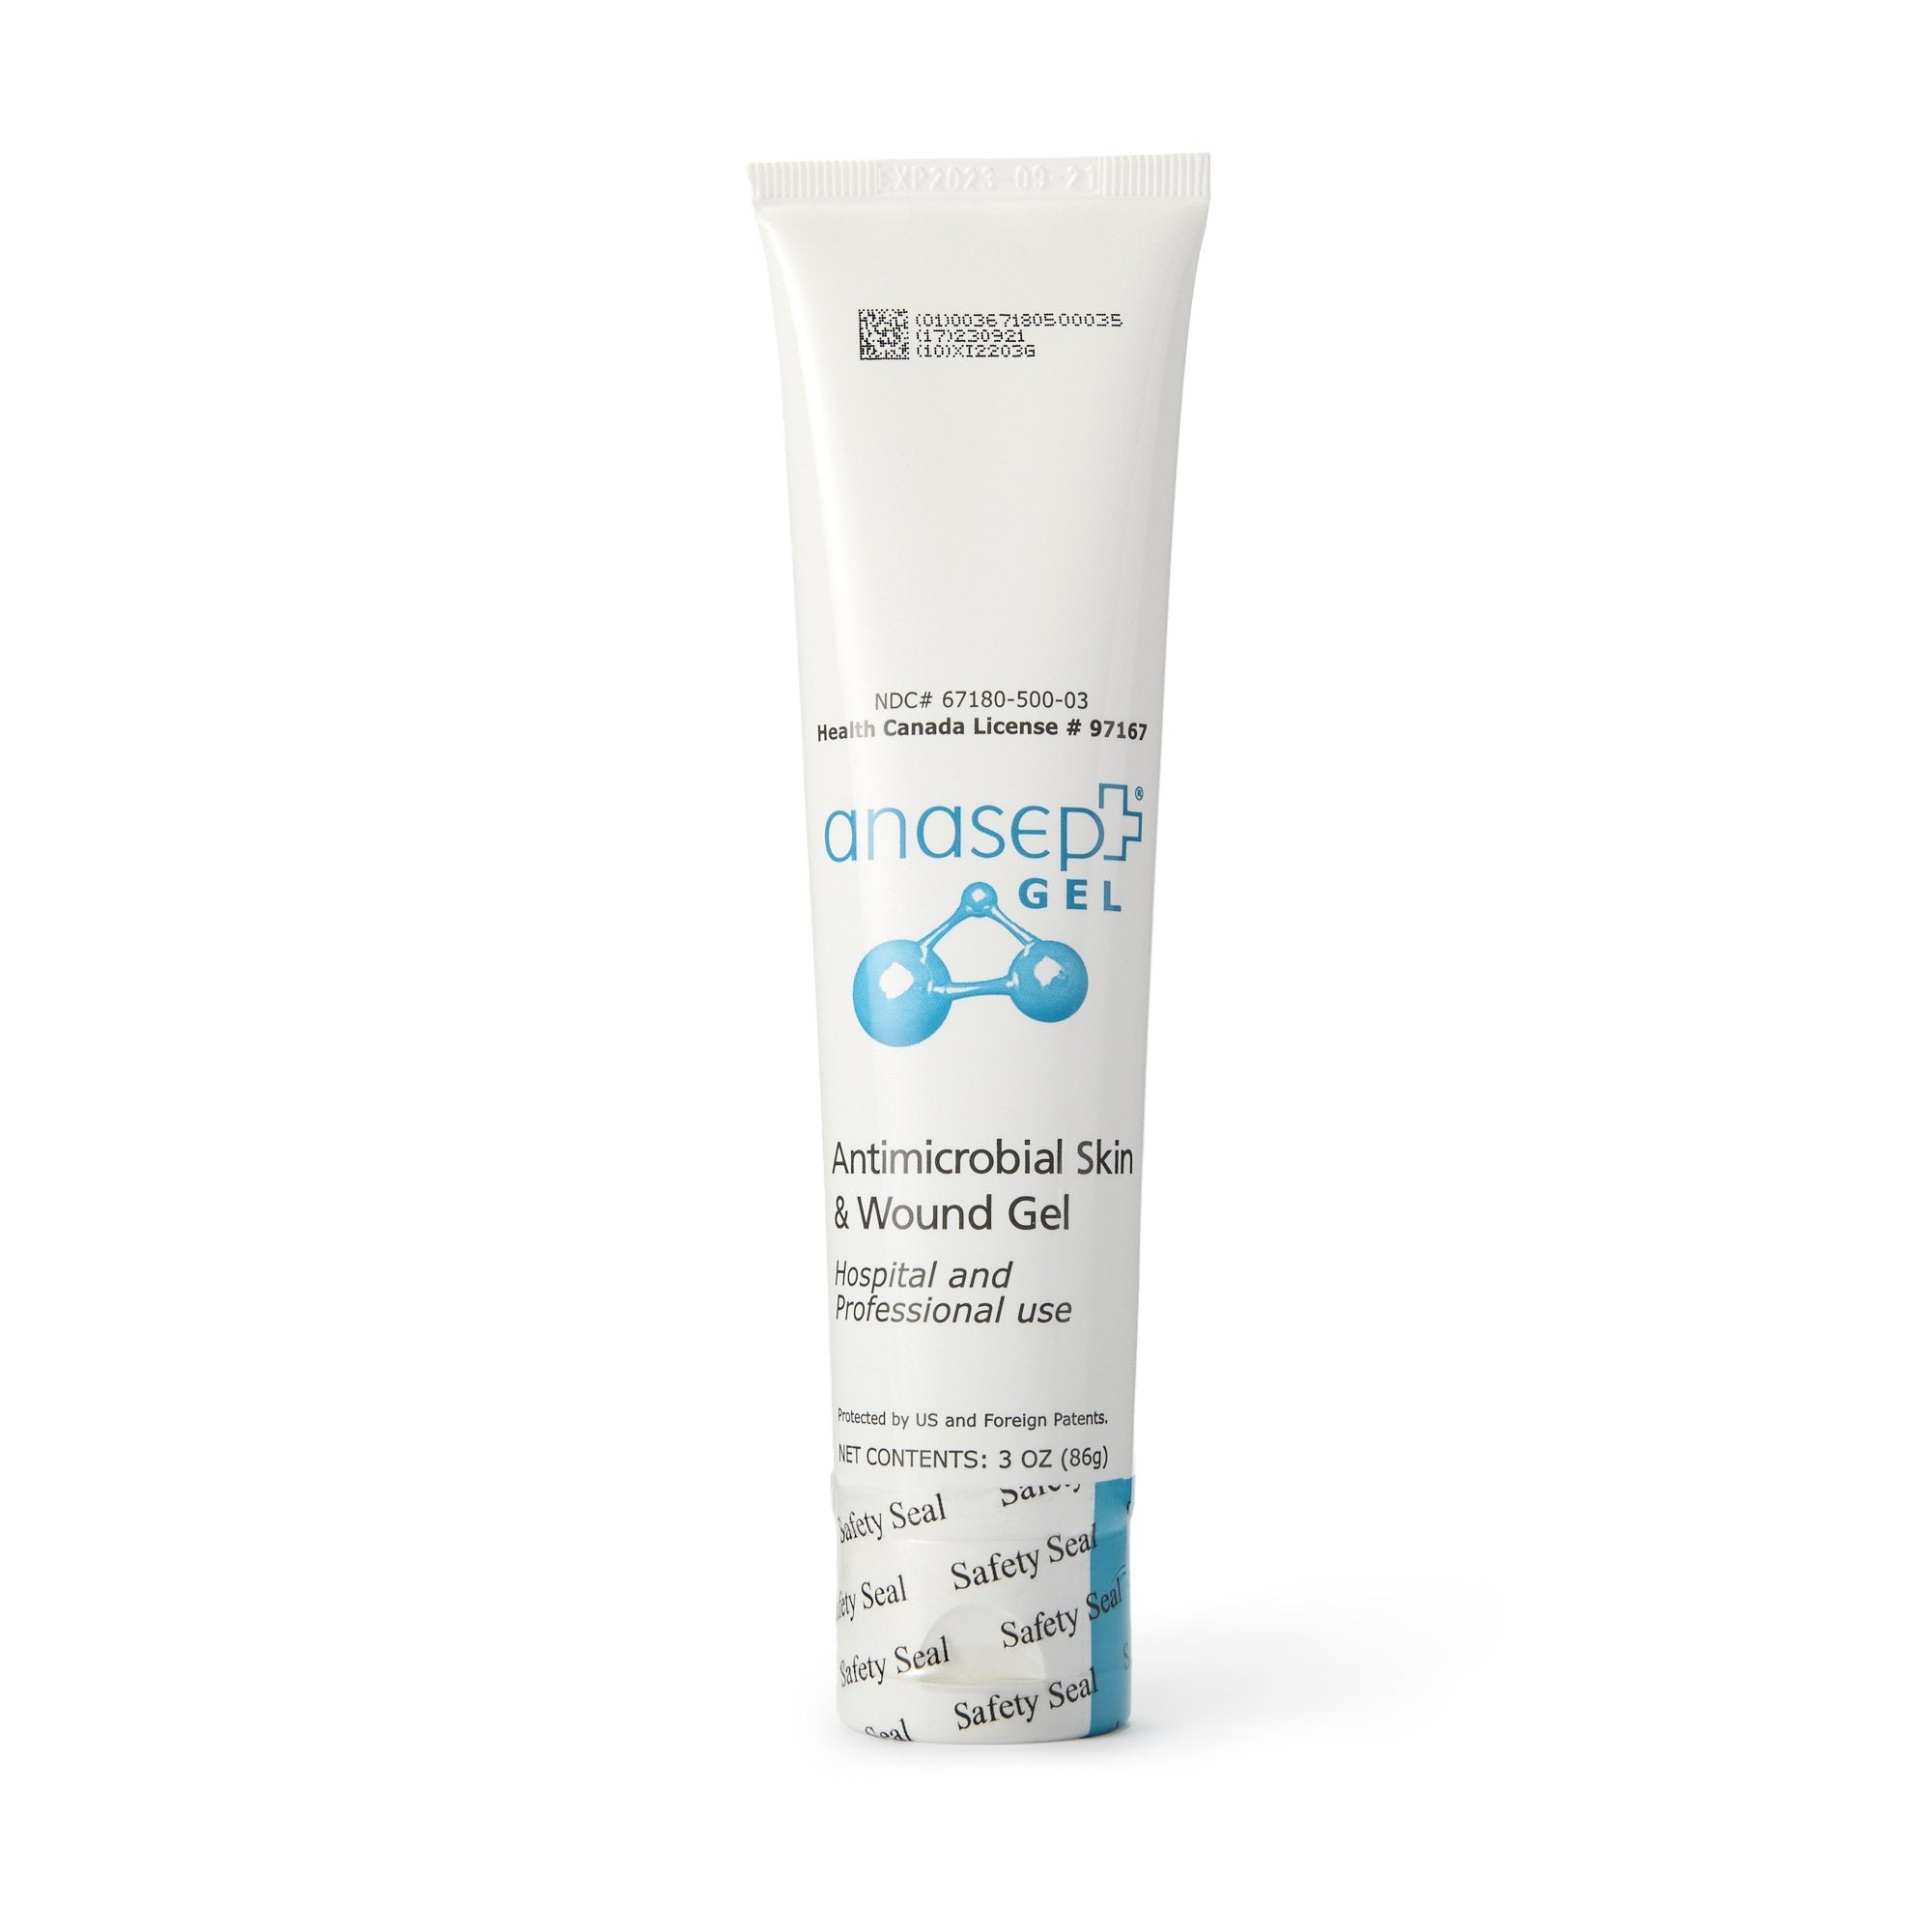 Antimicrobial Hydrogel Anasept® Antimicrobial Skin and Wound Gel 3 oz. Gel / Amorphous Gel / Amorphous NonSterile